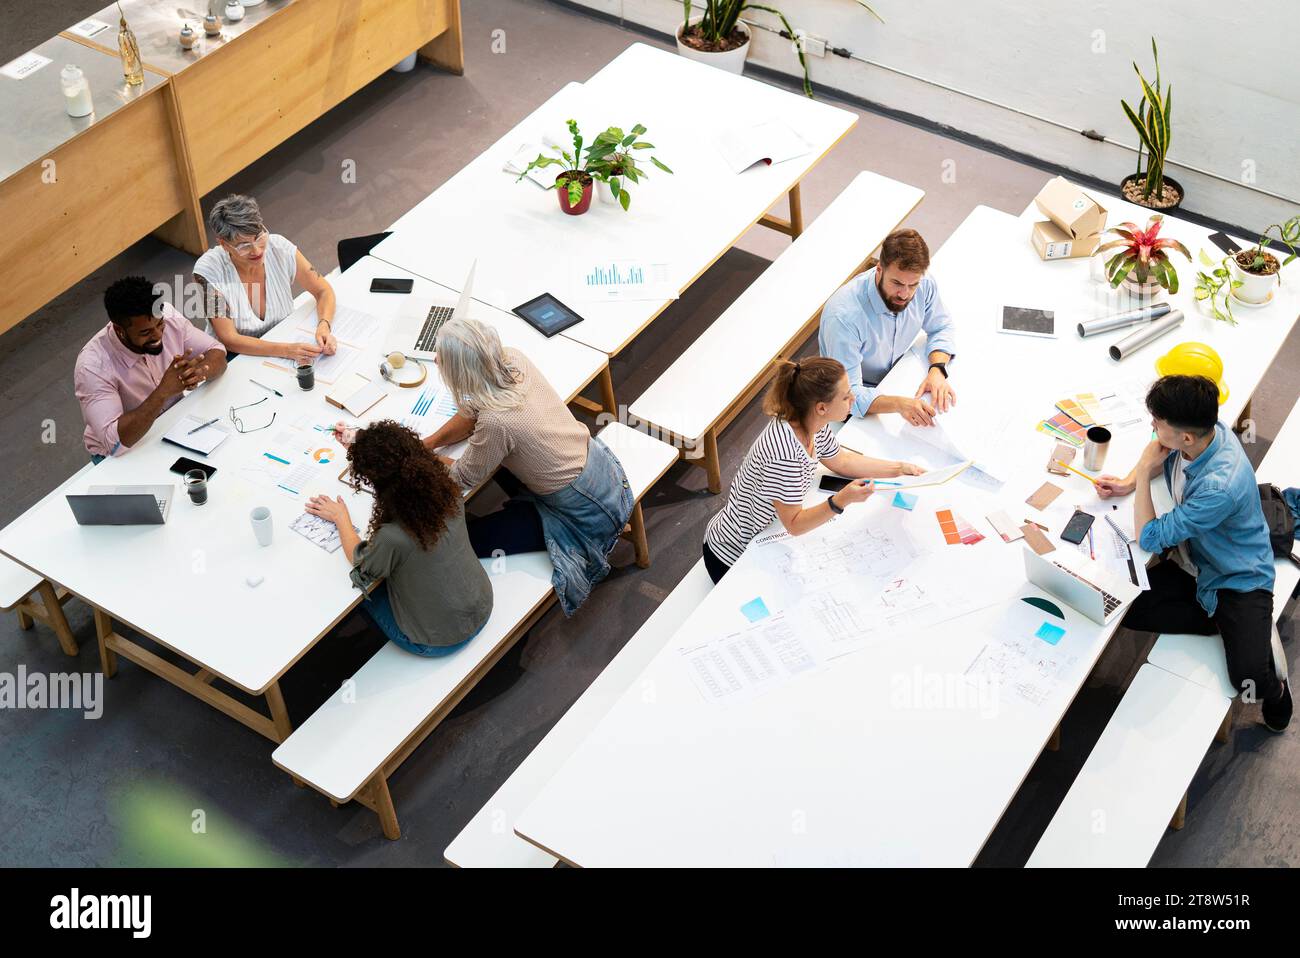 Wide view of place of work full of people having casual meetings Stock Photo